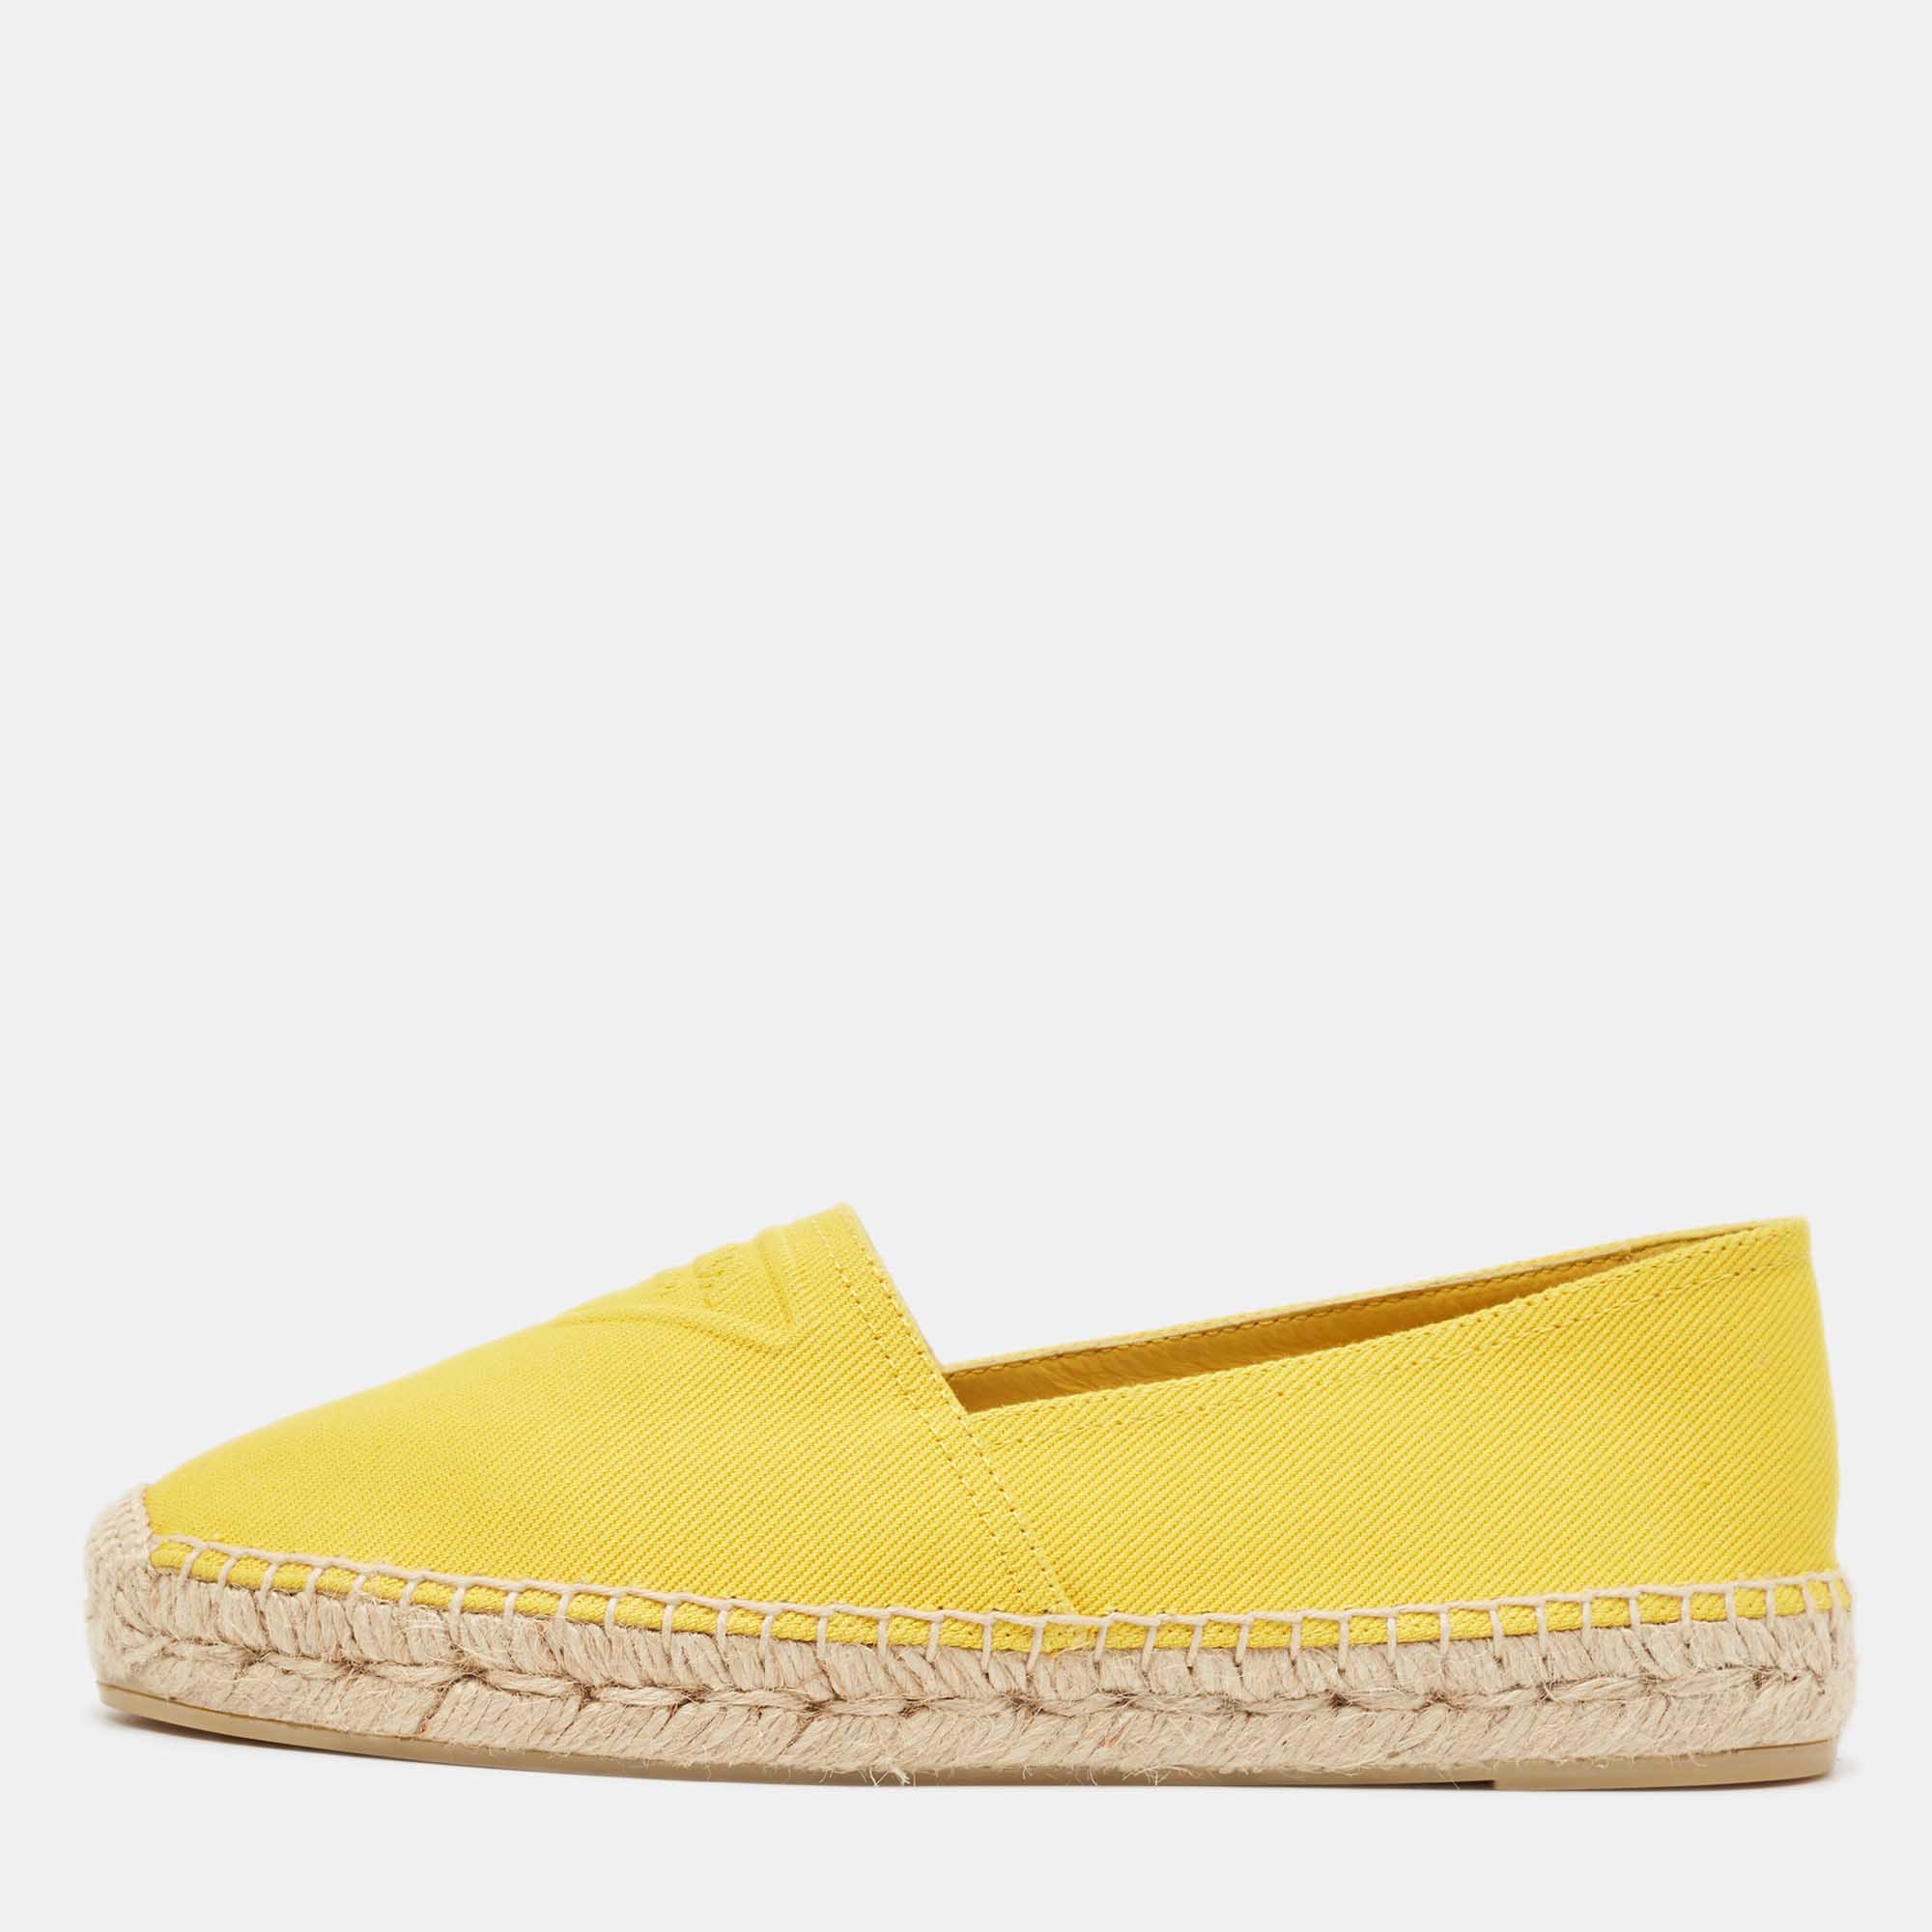 Pre-owned Prada Yellow Canvas Espadrille Flats Size 40